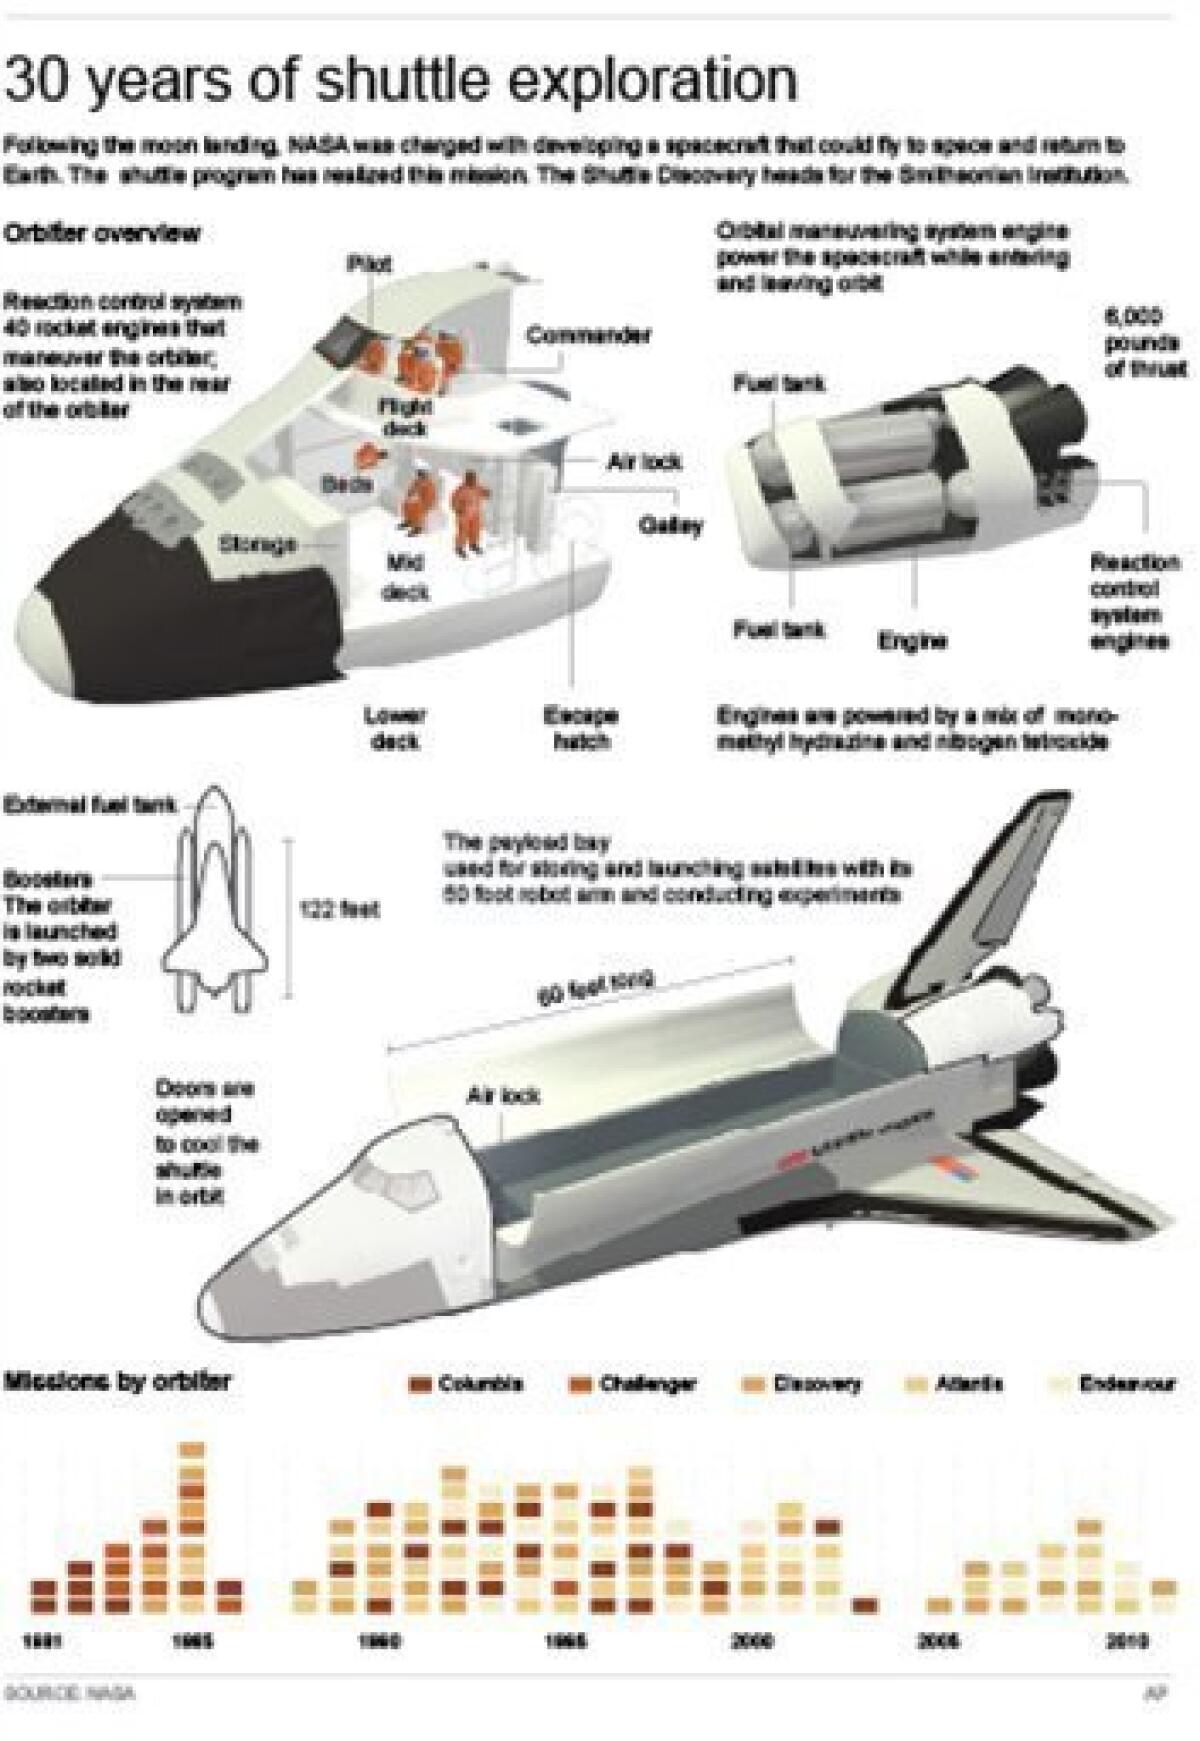 information about space shuttles